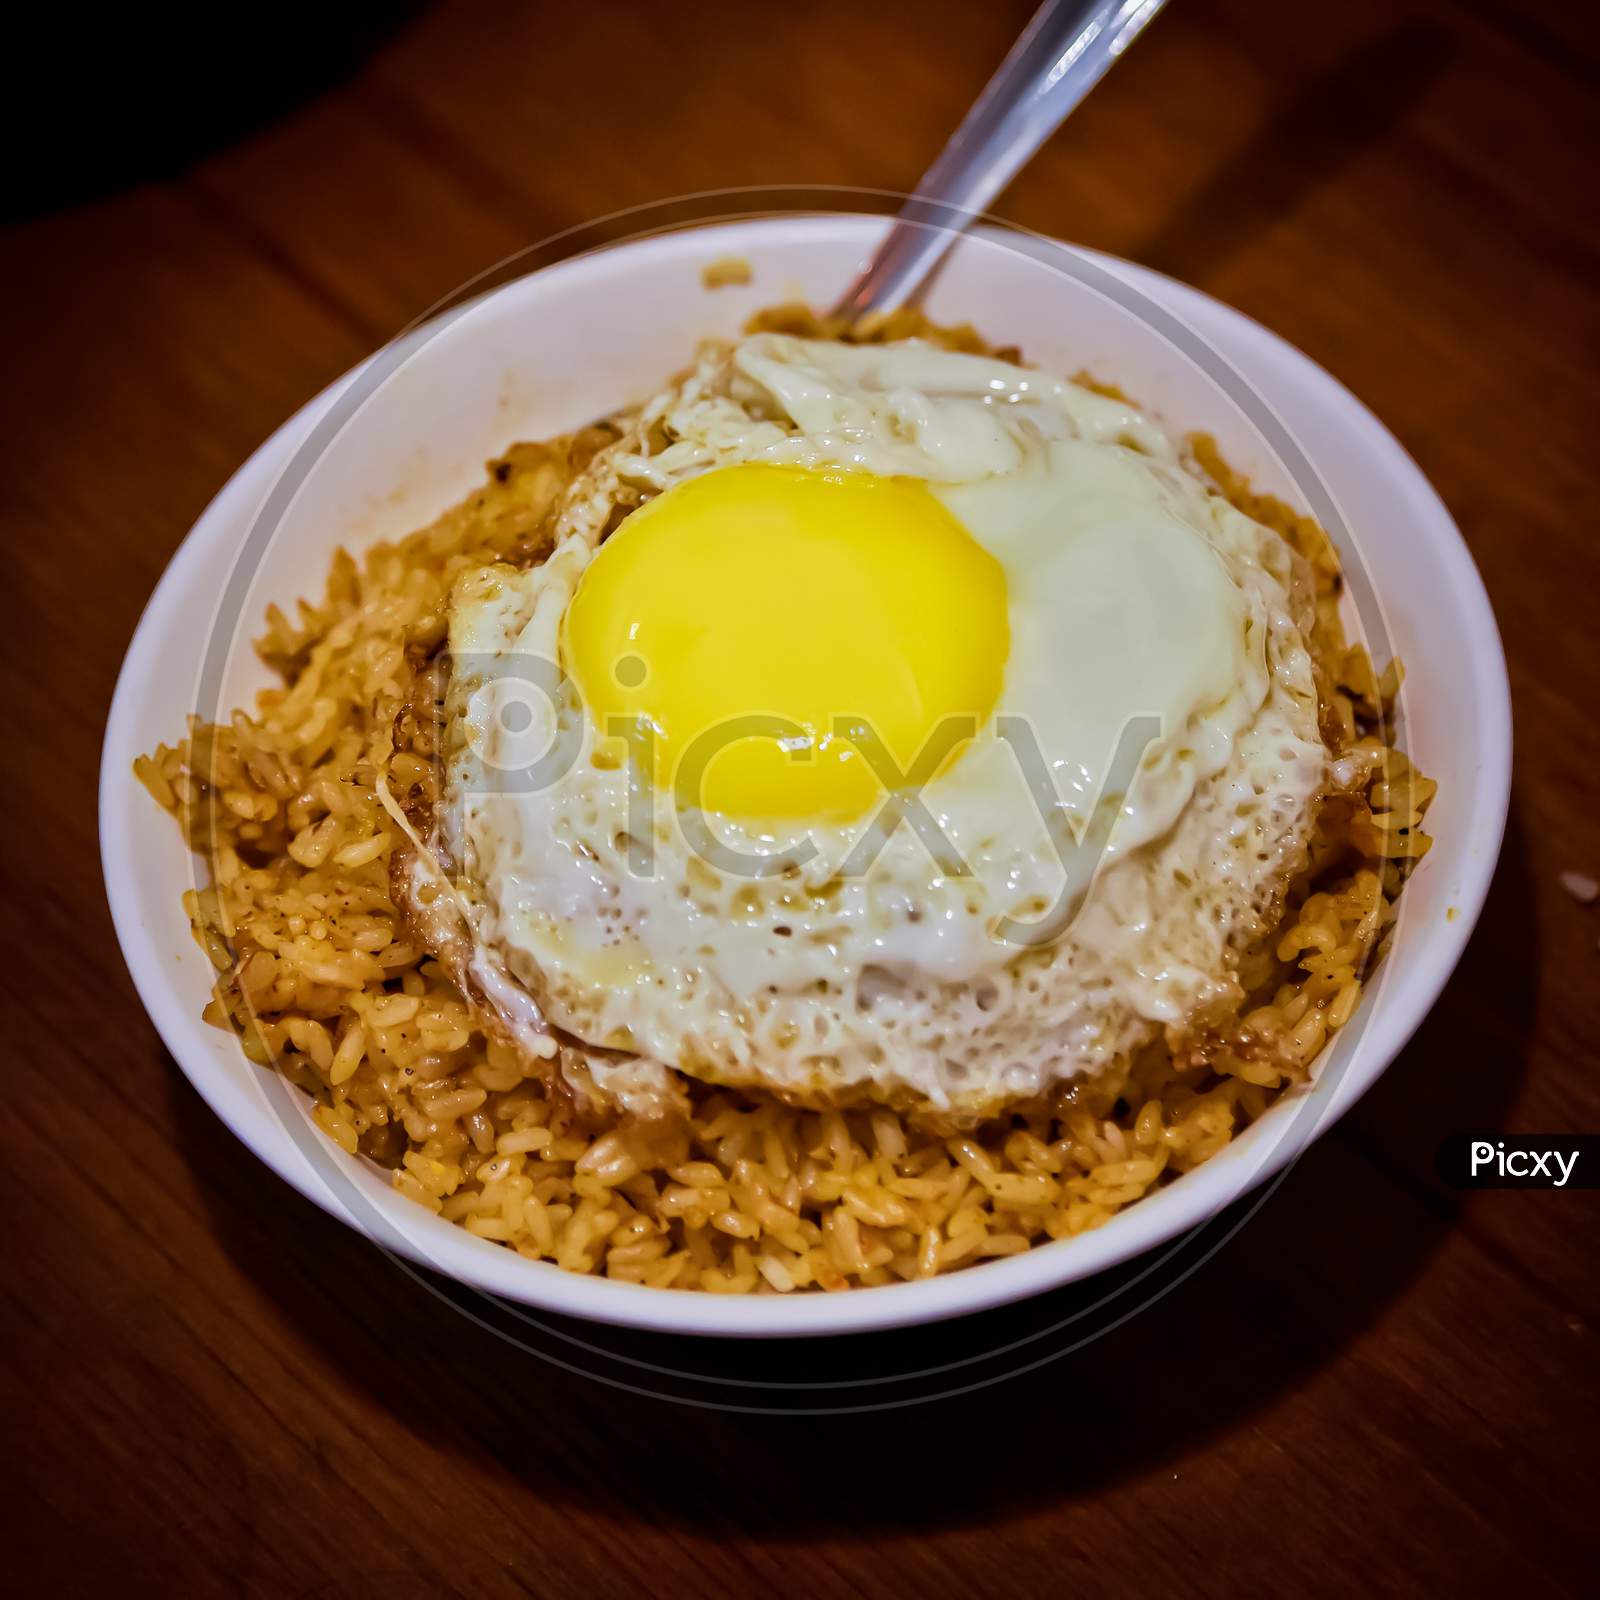 Spicy Schezwan Fried Rice With Fried Egg On Top.